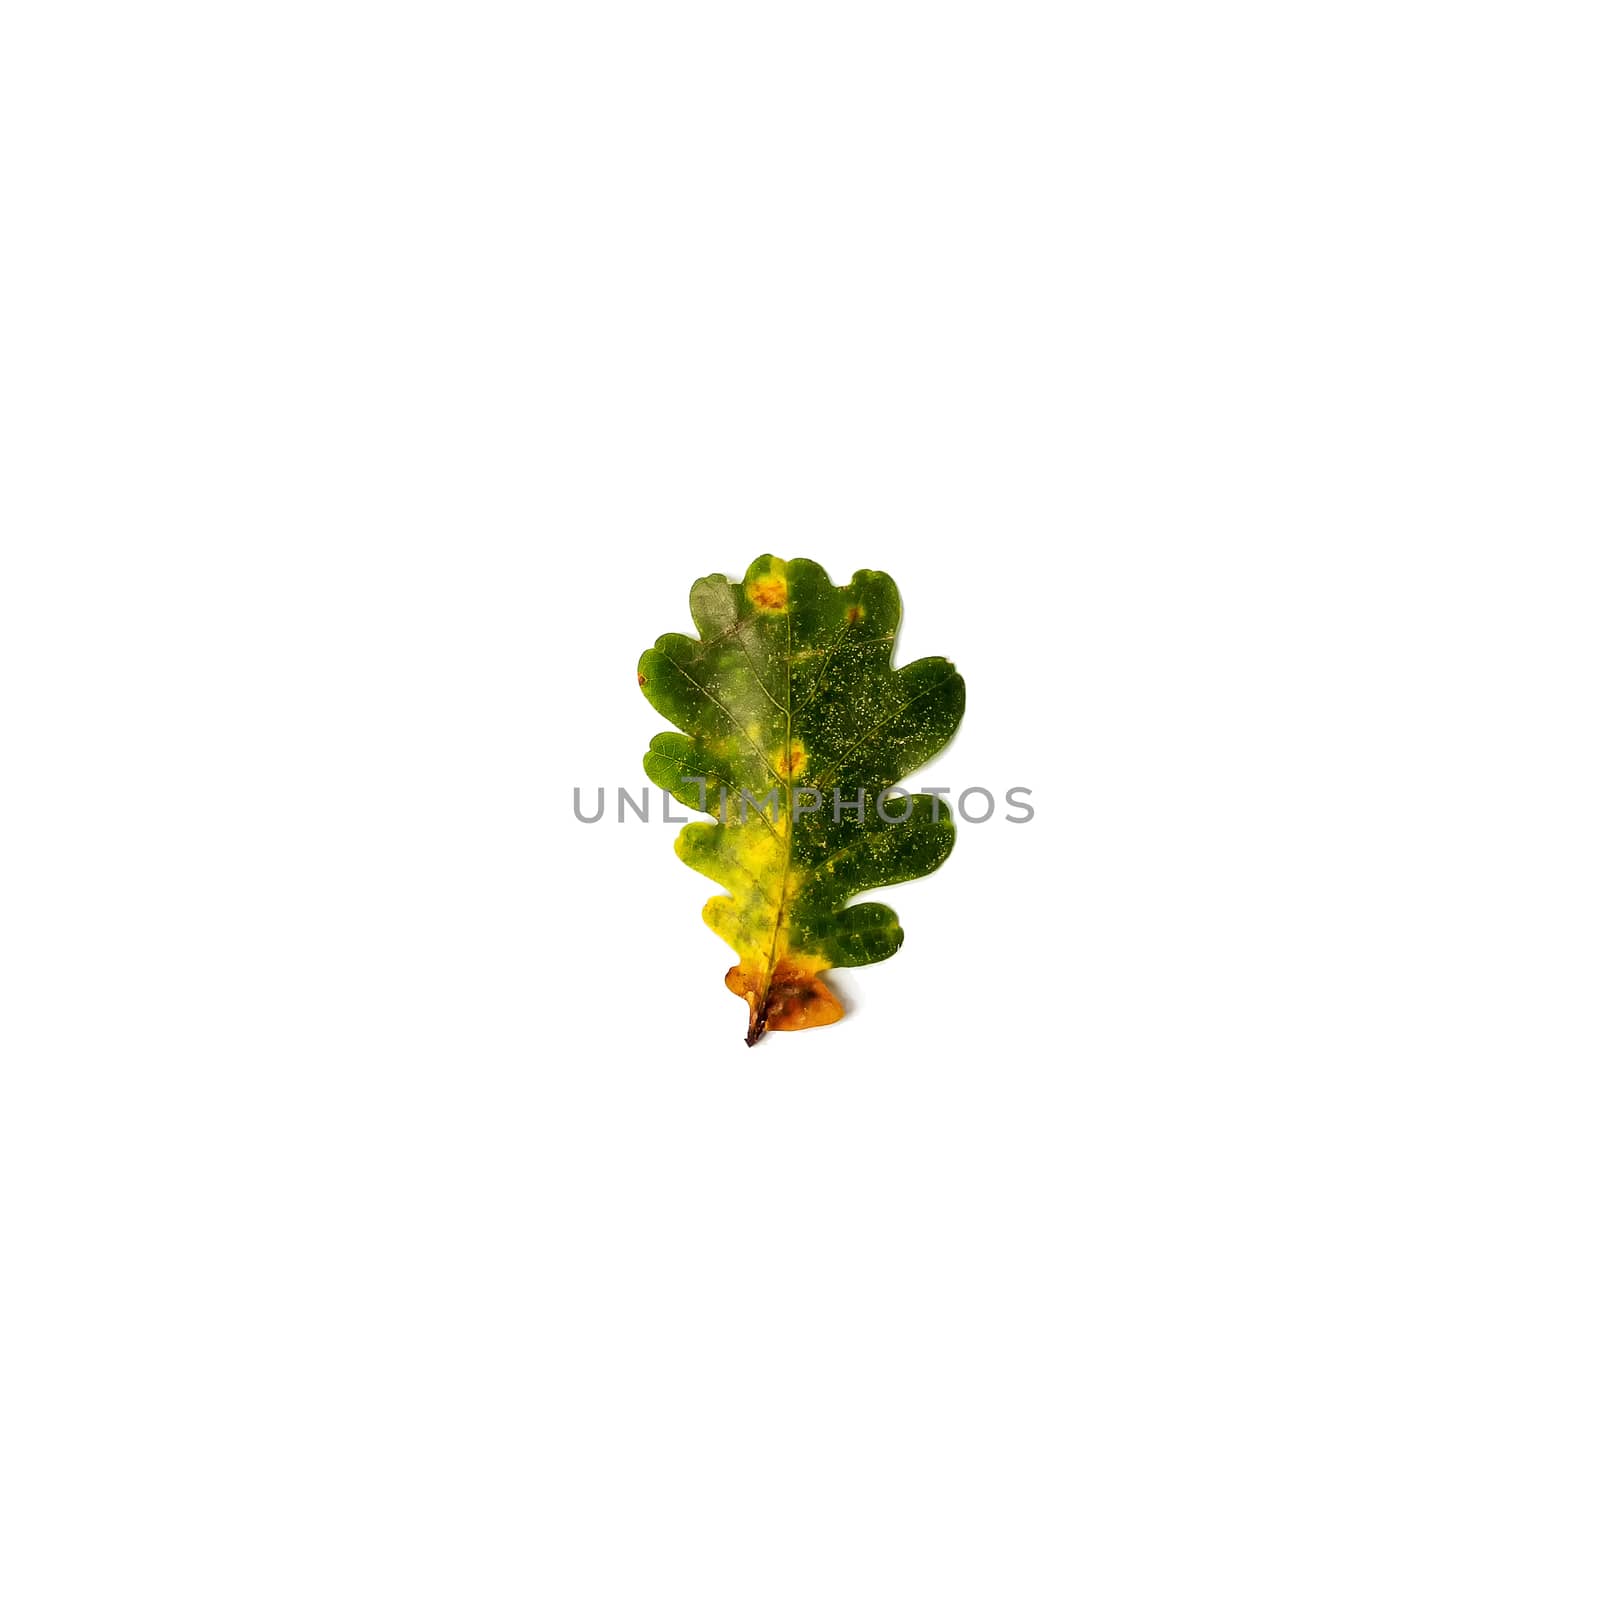 Green and yellow oak leaf isolated on a white background